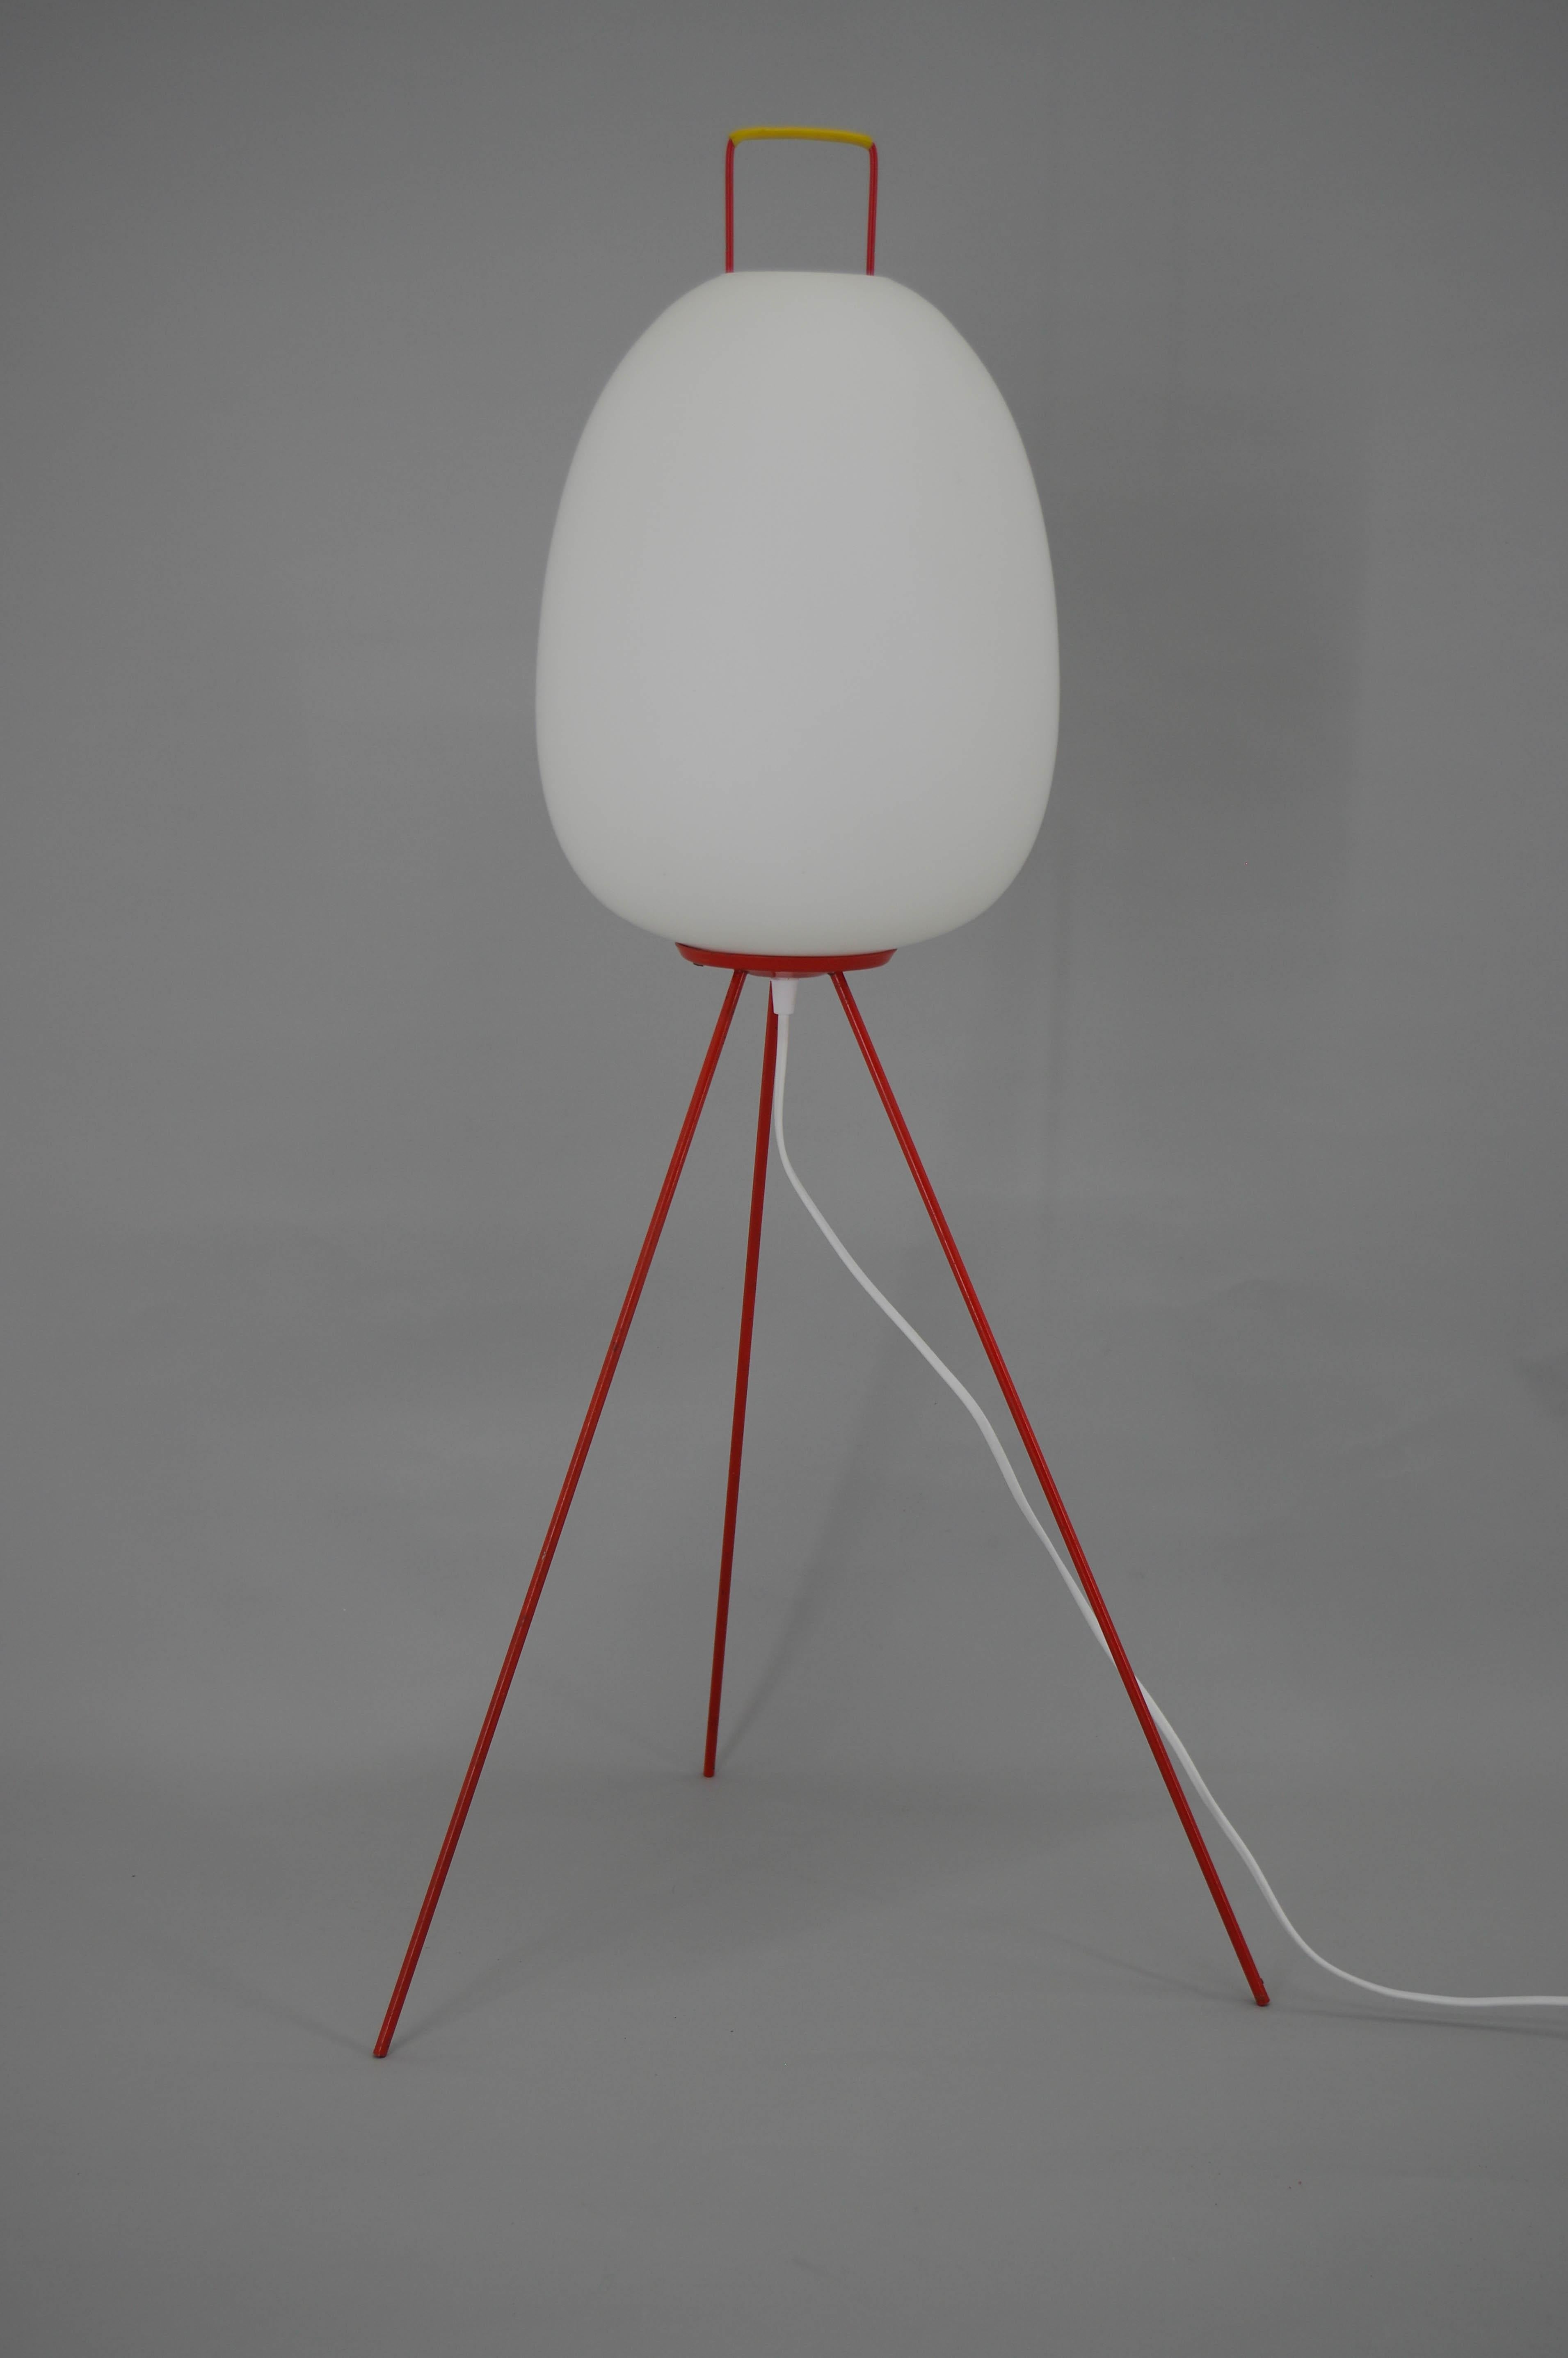 Very rare Egg floor lamp made in Czechoslovakia by Napako in 1960s.
Very good original condition.
1x100W, E25-E27 bulb
US plug adapter included
Shipping quote on request